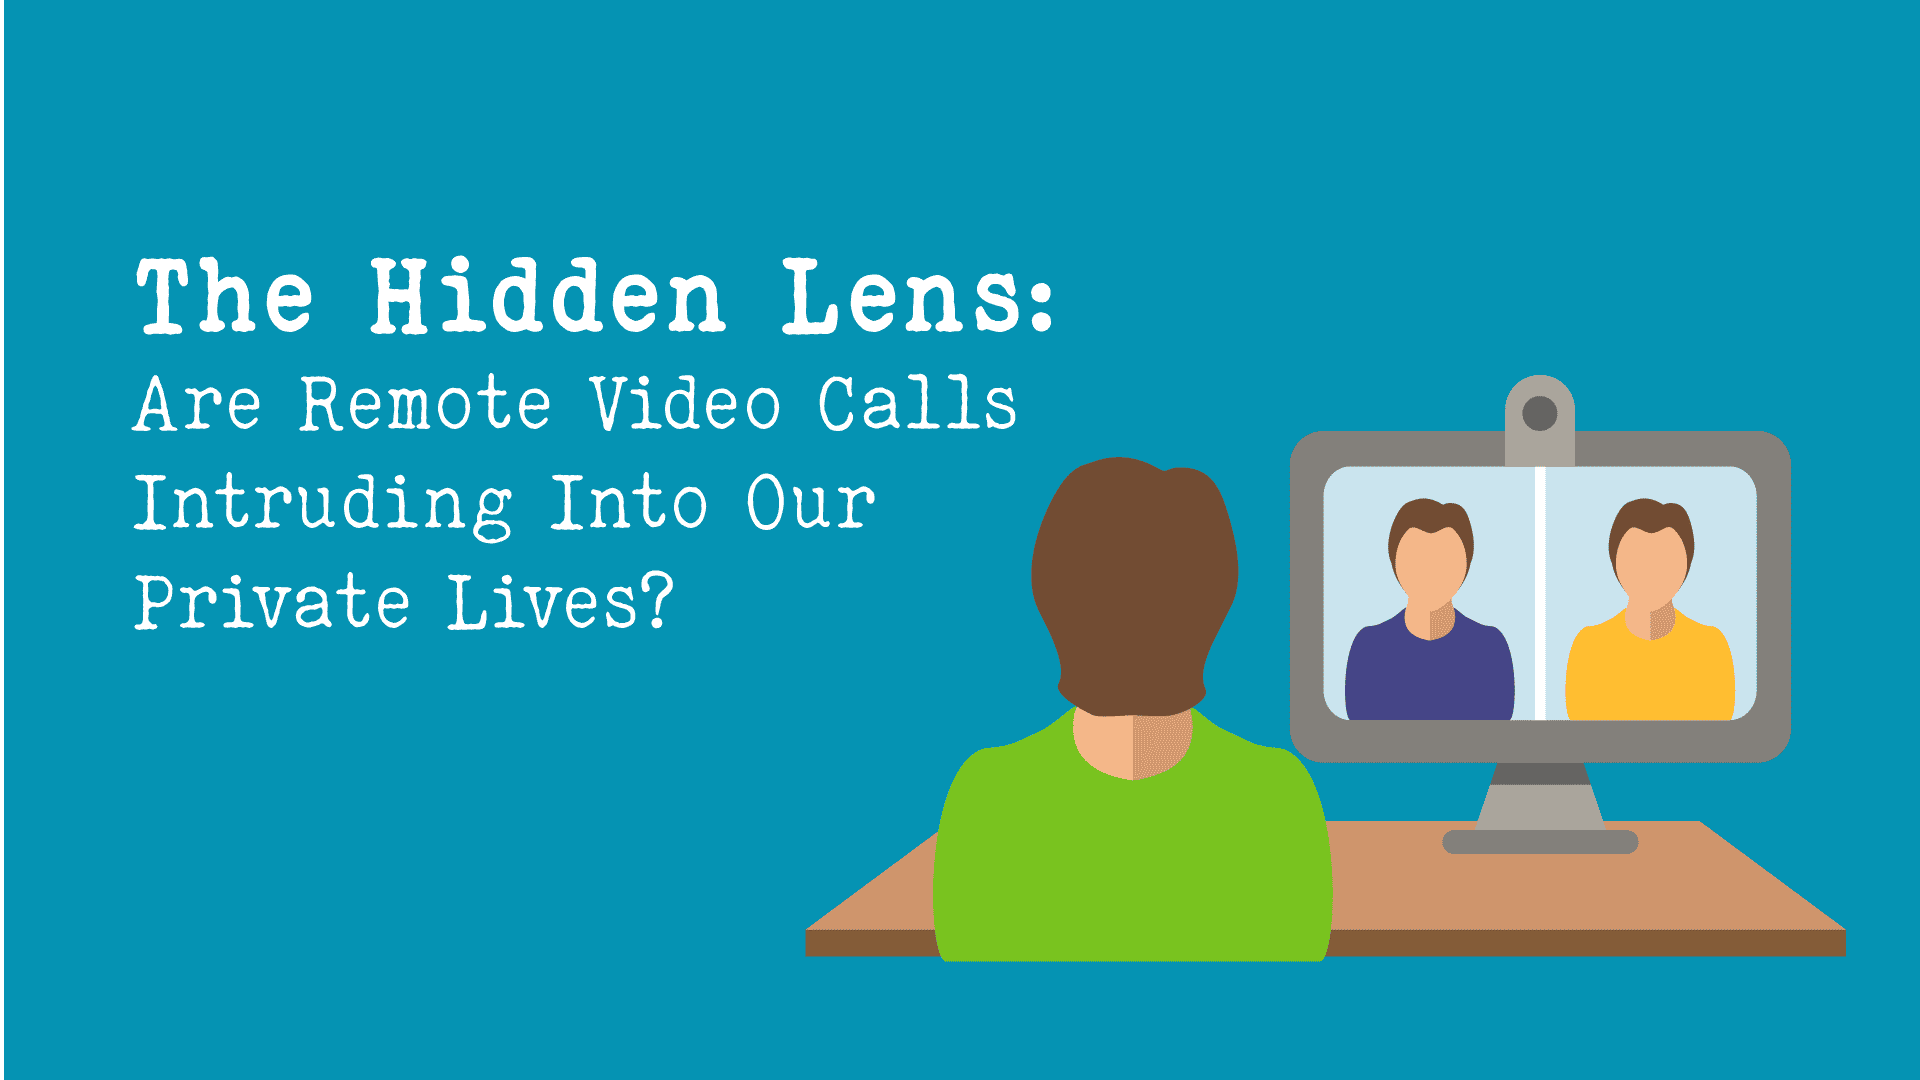 The Hidden Lens: Are Remote Video Calls Intruding Into Our Private Lives?